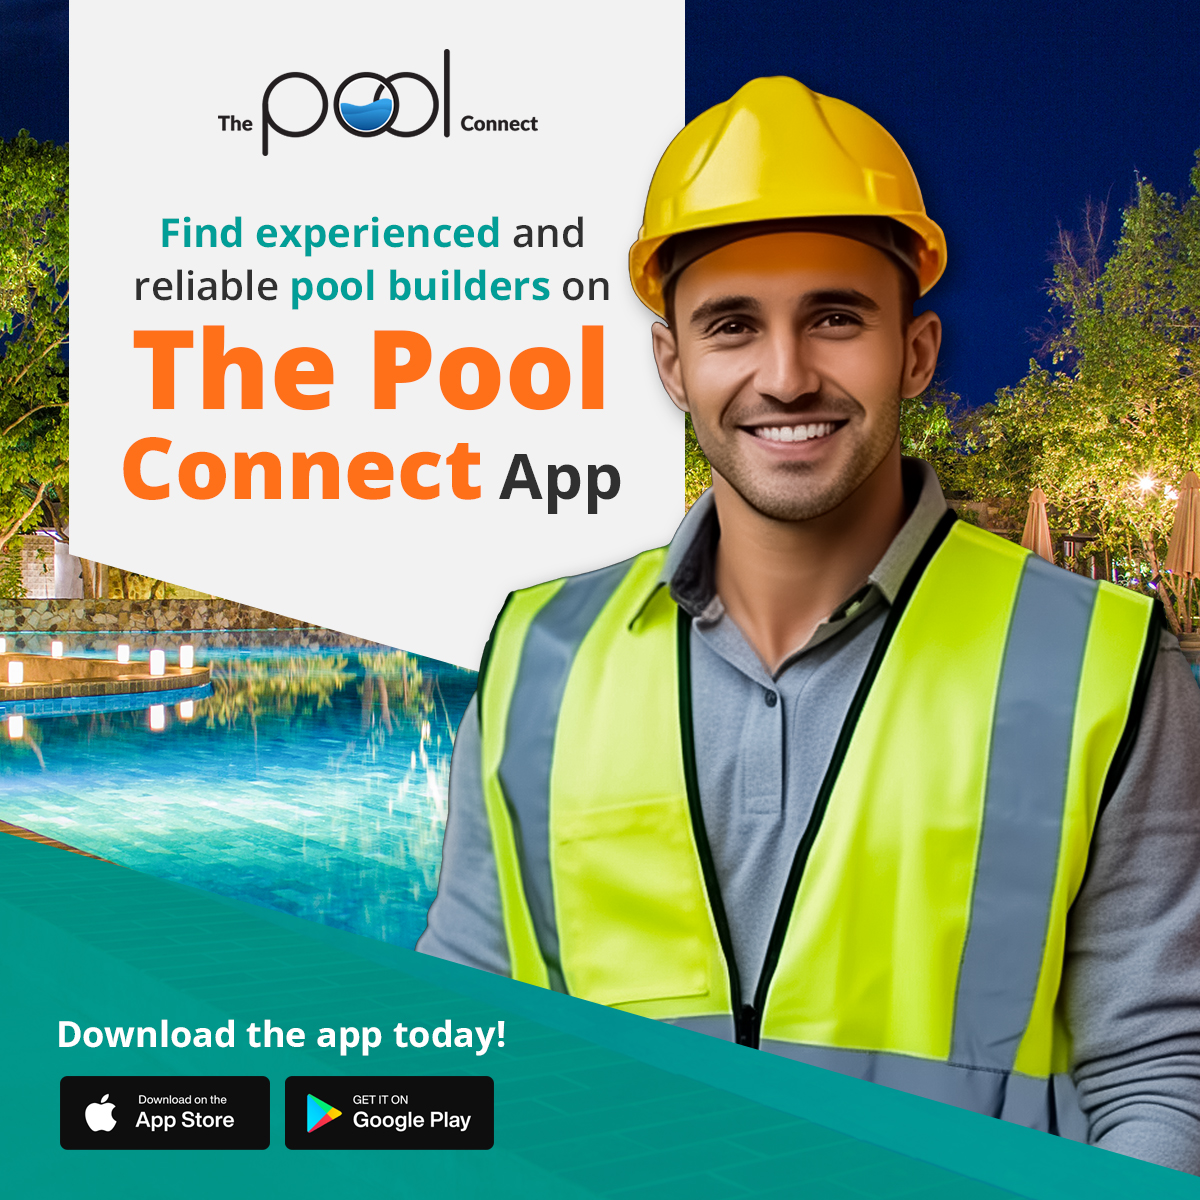 Dive into excellence with The Pool Connect App
Discover experienced pool builders ready to make your dream pool a reality

Visit: thepoolconnect.com

#thepoolconnect #mason #steelwork #poolcontractor #poolrenovation #poolmaintenance #poolconstruction #poolsubcontractor #pool